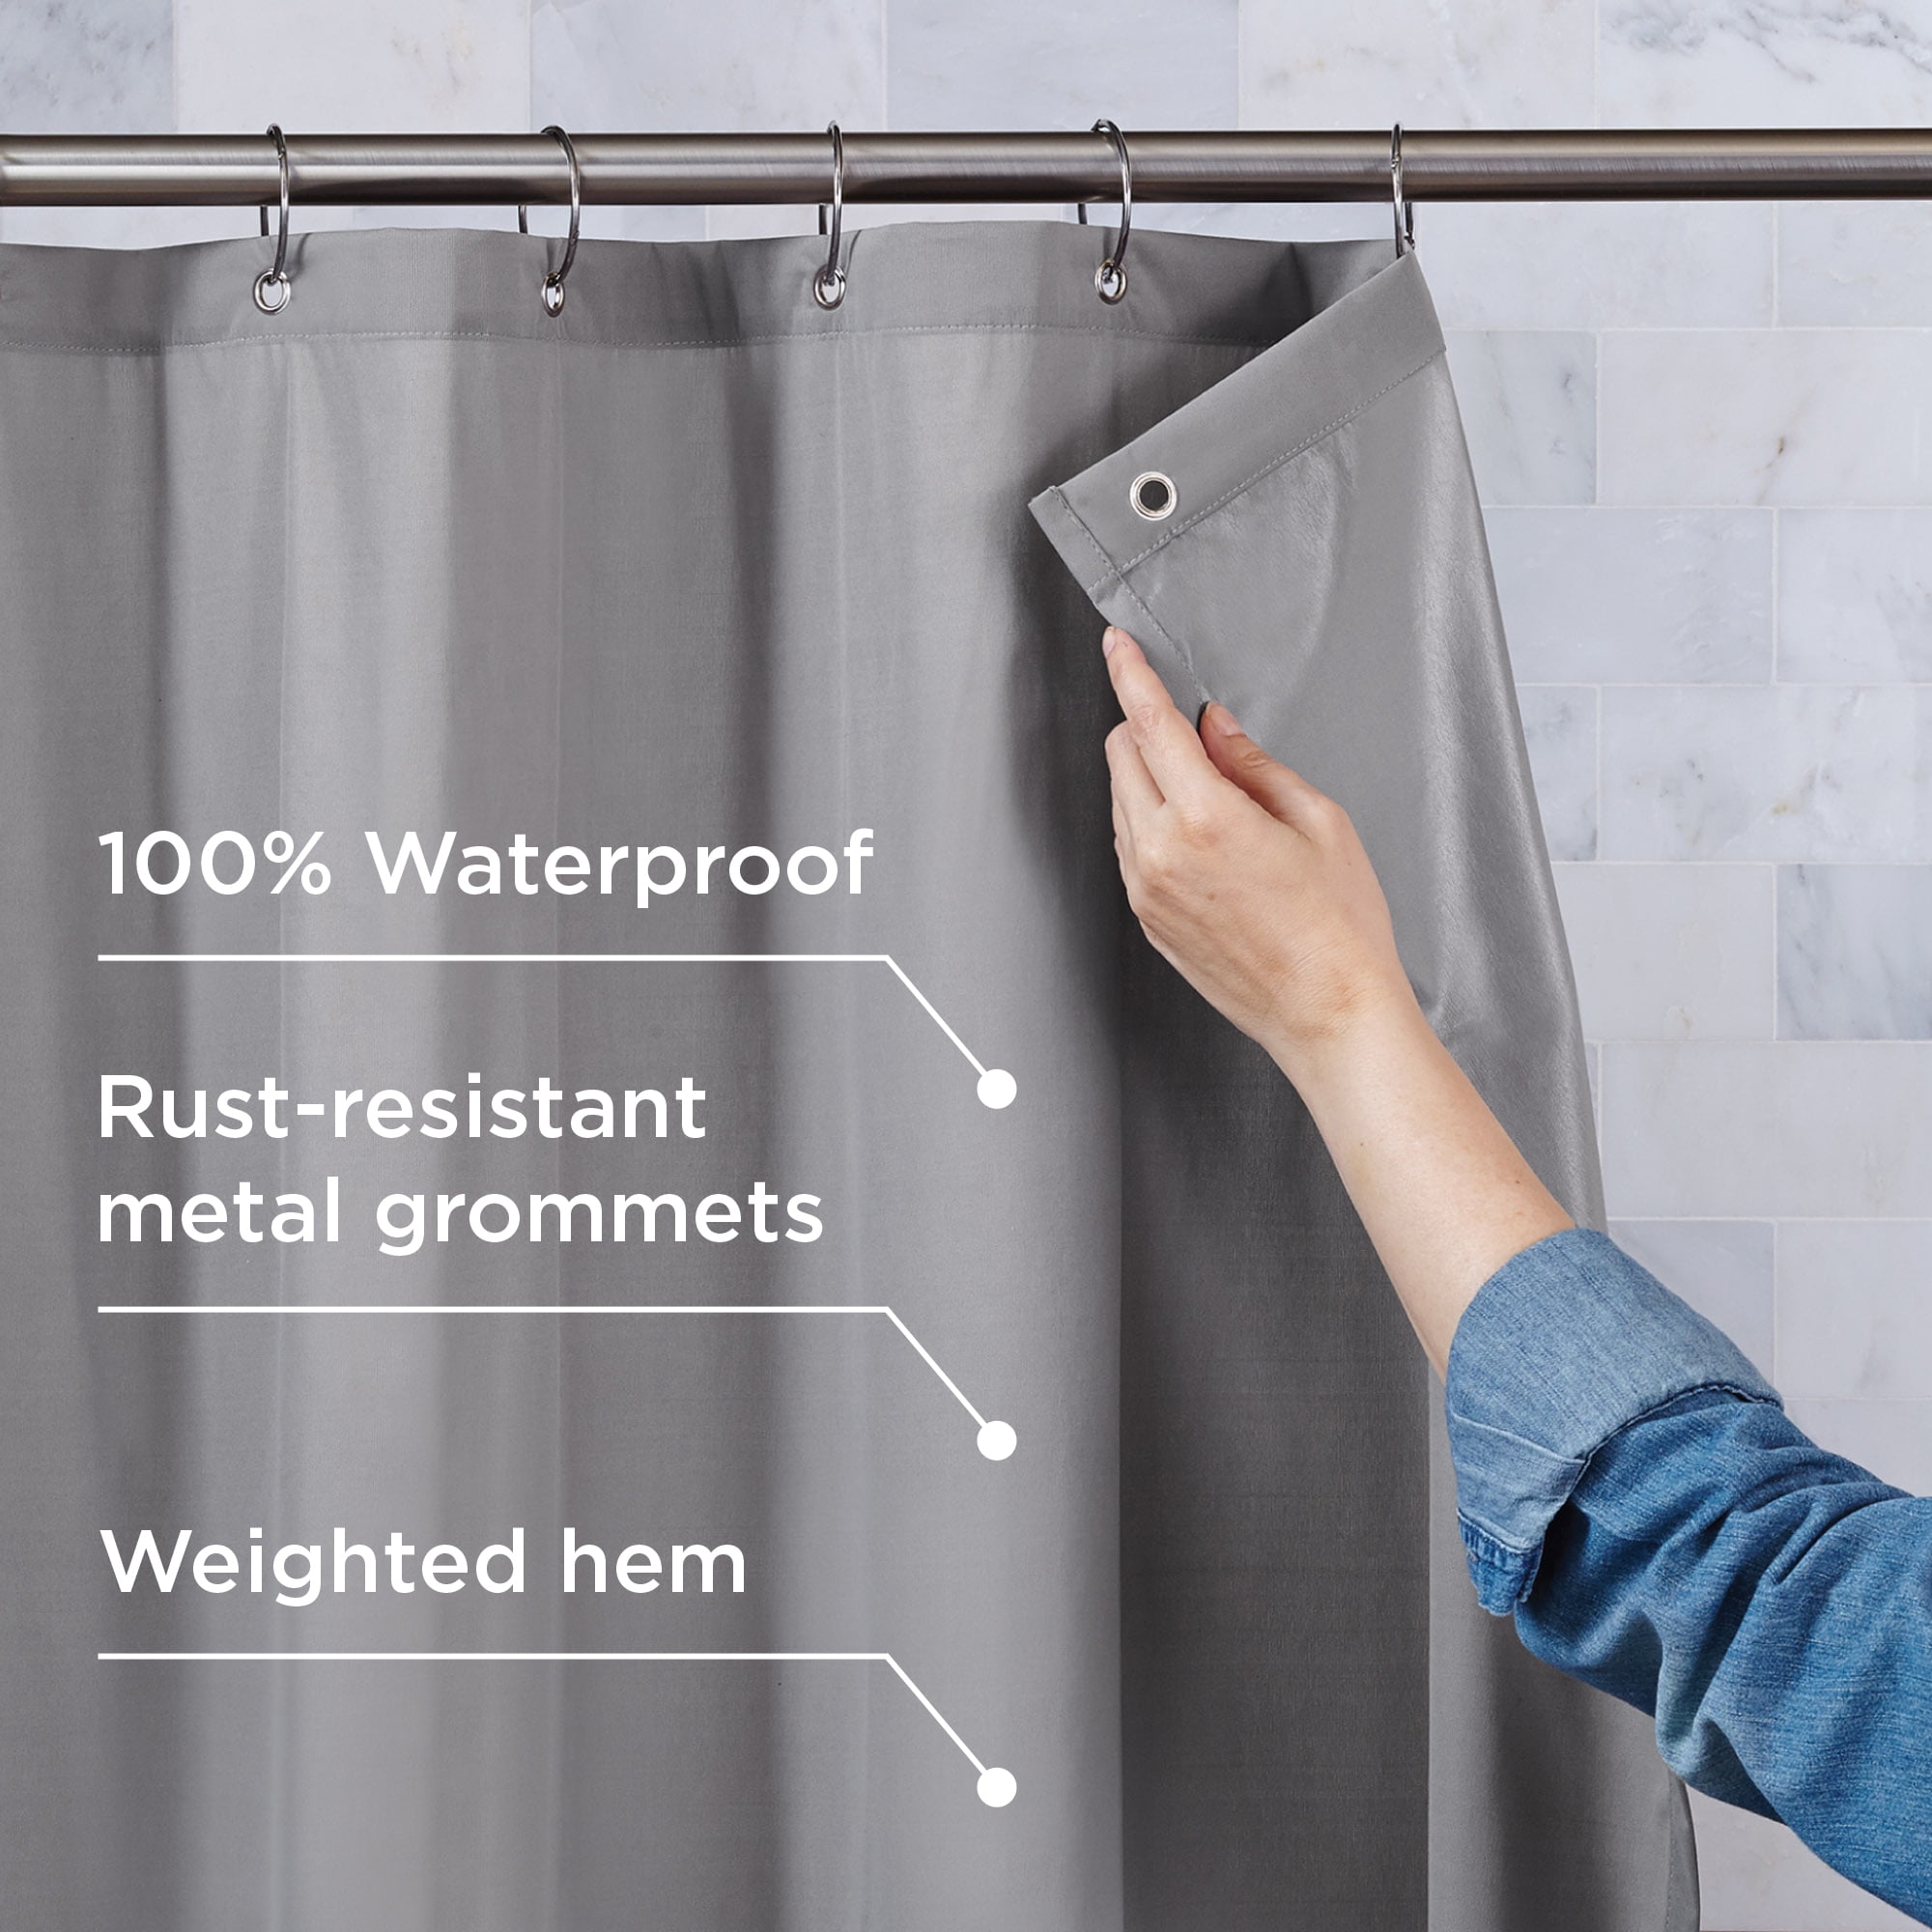 Waterproof Fabric Shower Curtain Or, What Shower Curtain Material Does Not Need A Liner